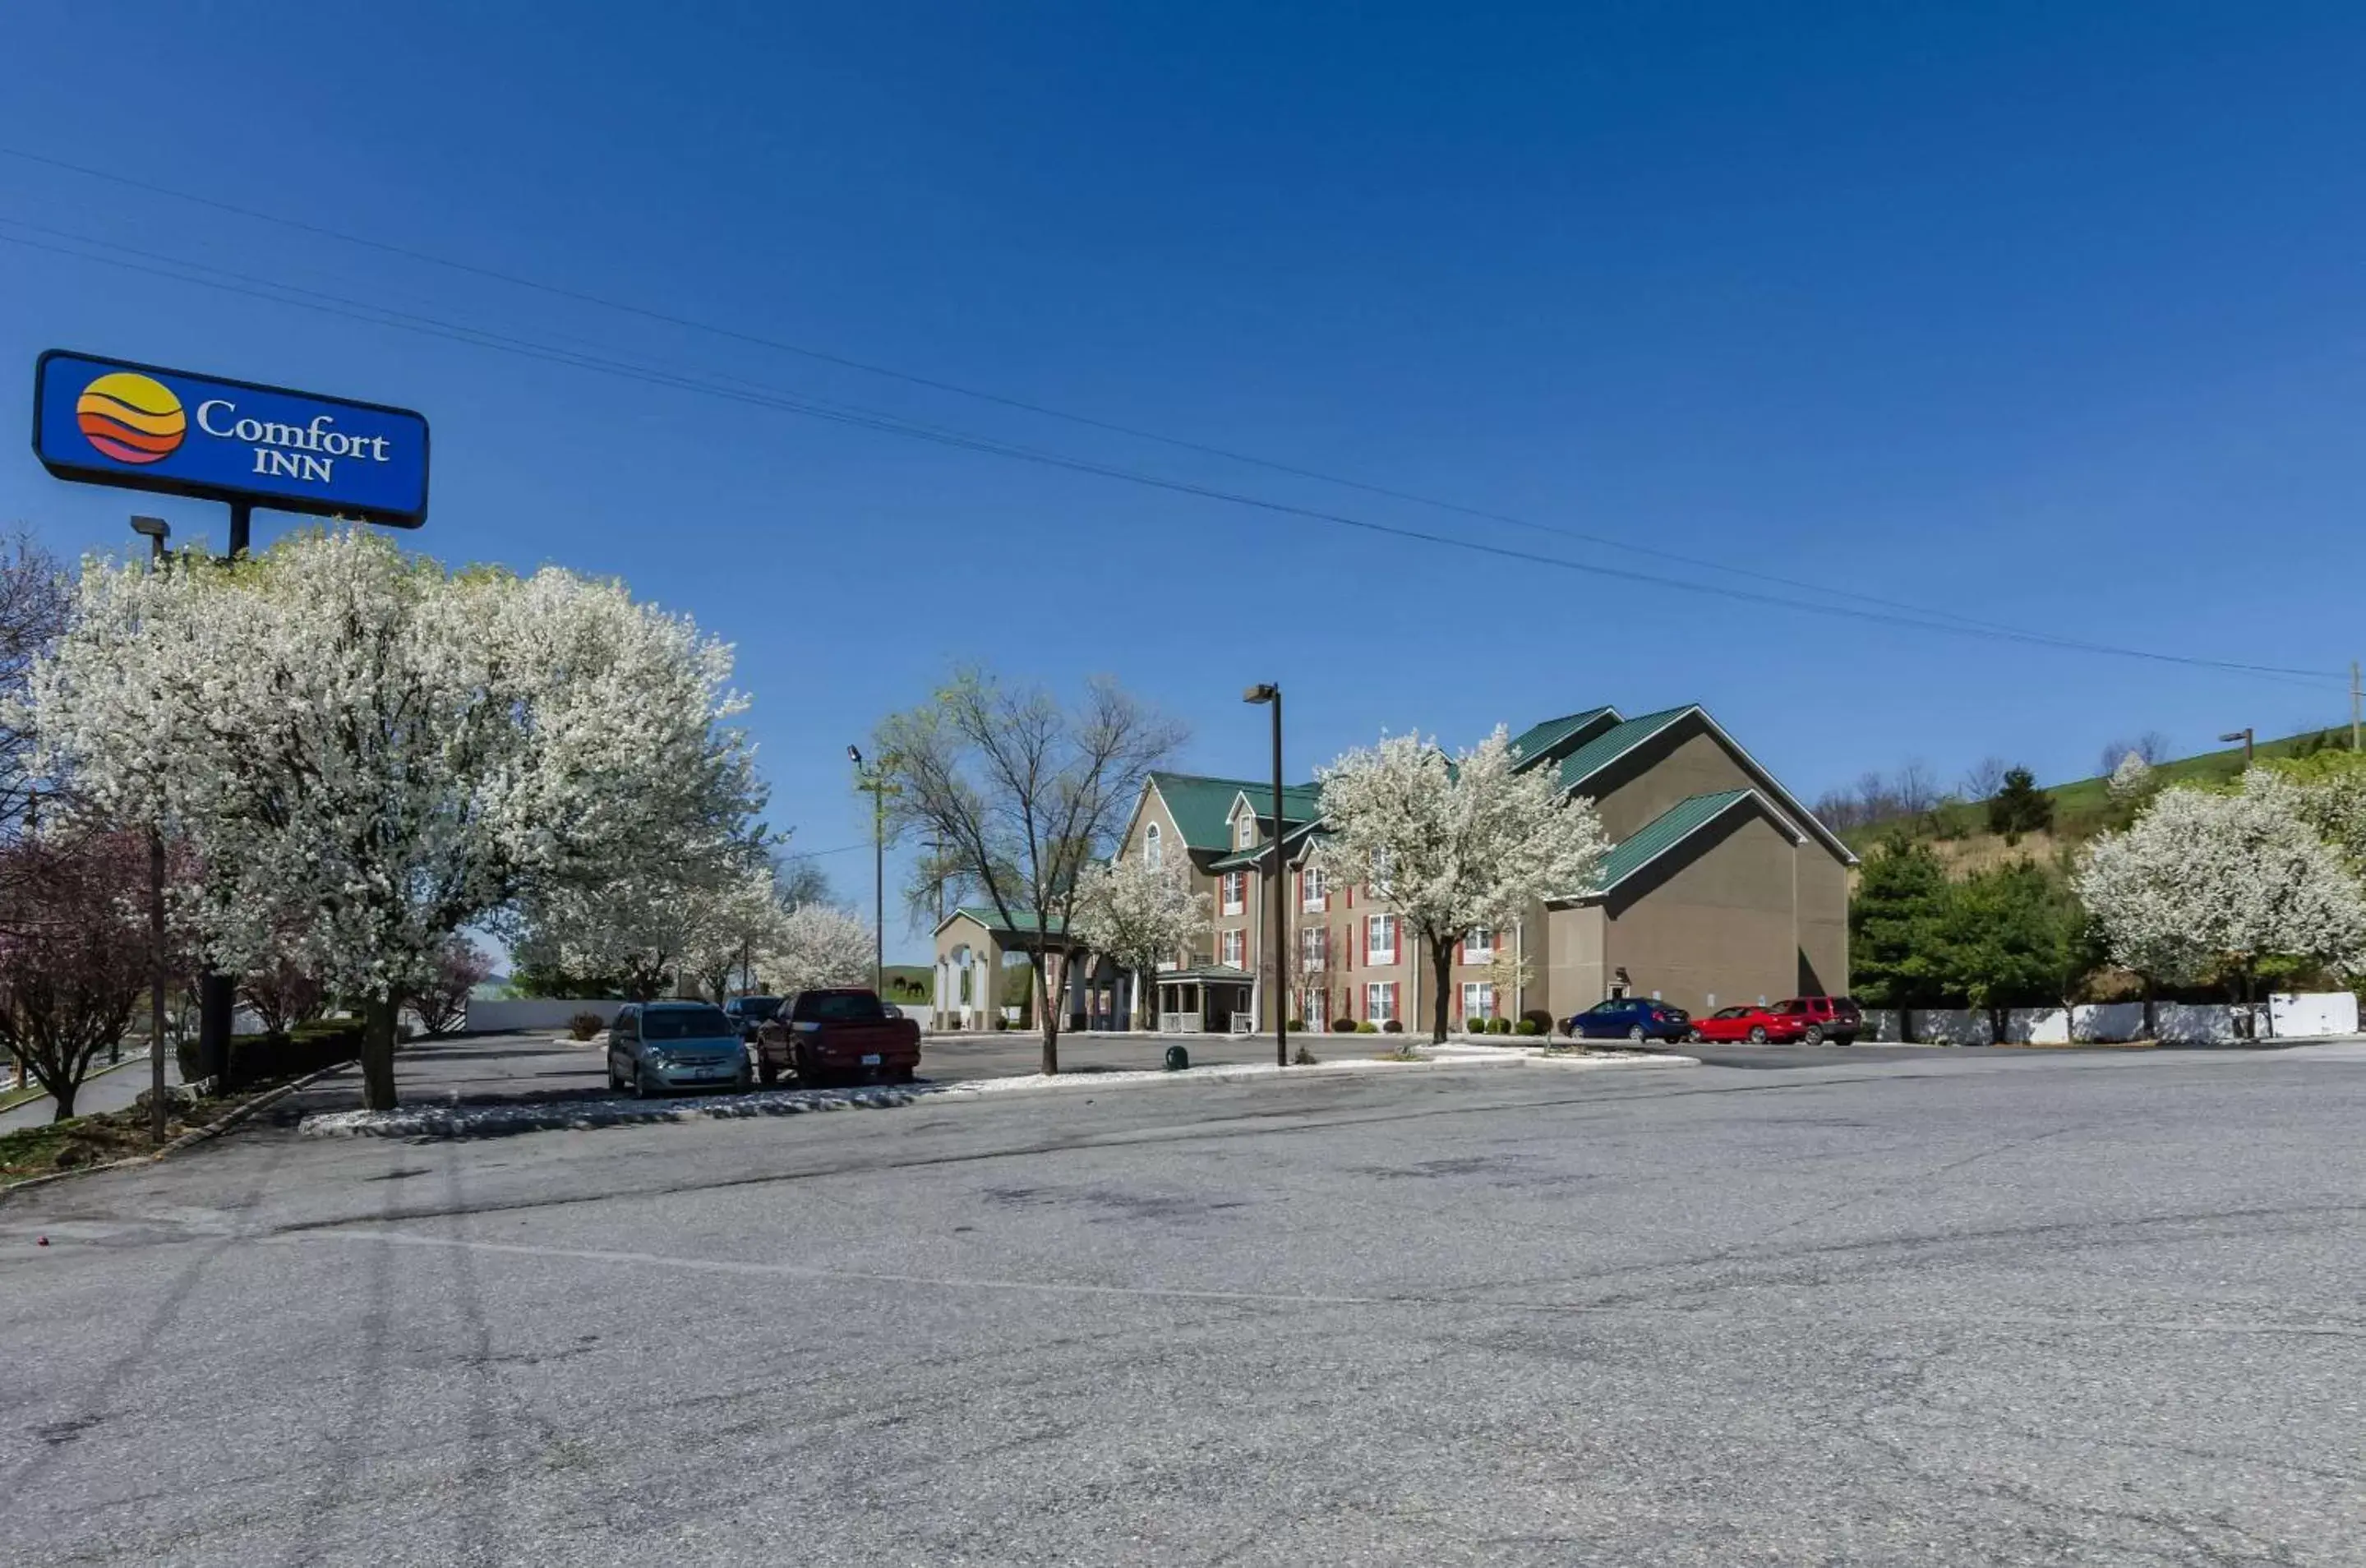 Property Building in Comfort Inn Wytheville - Fort Chiswell